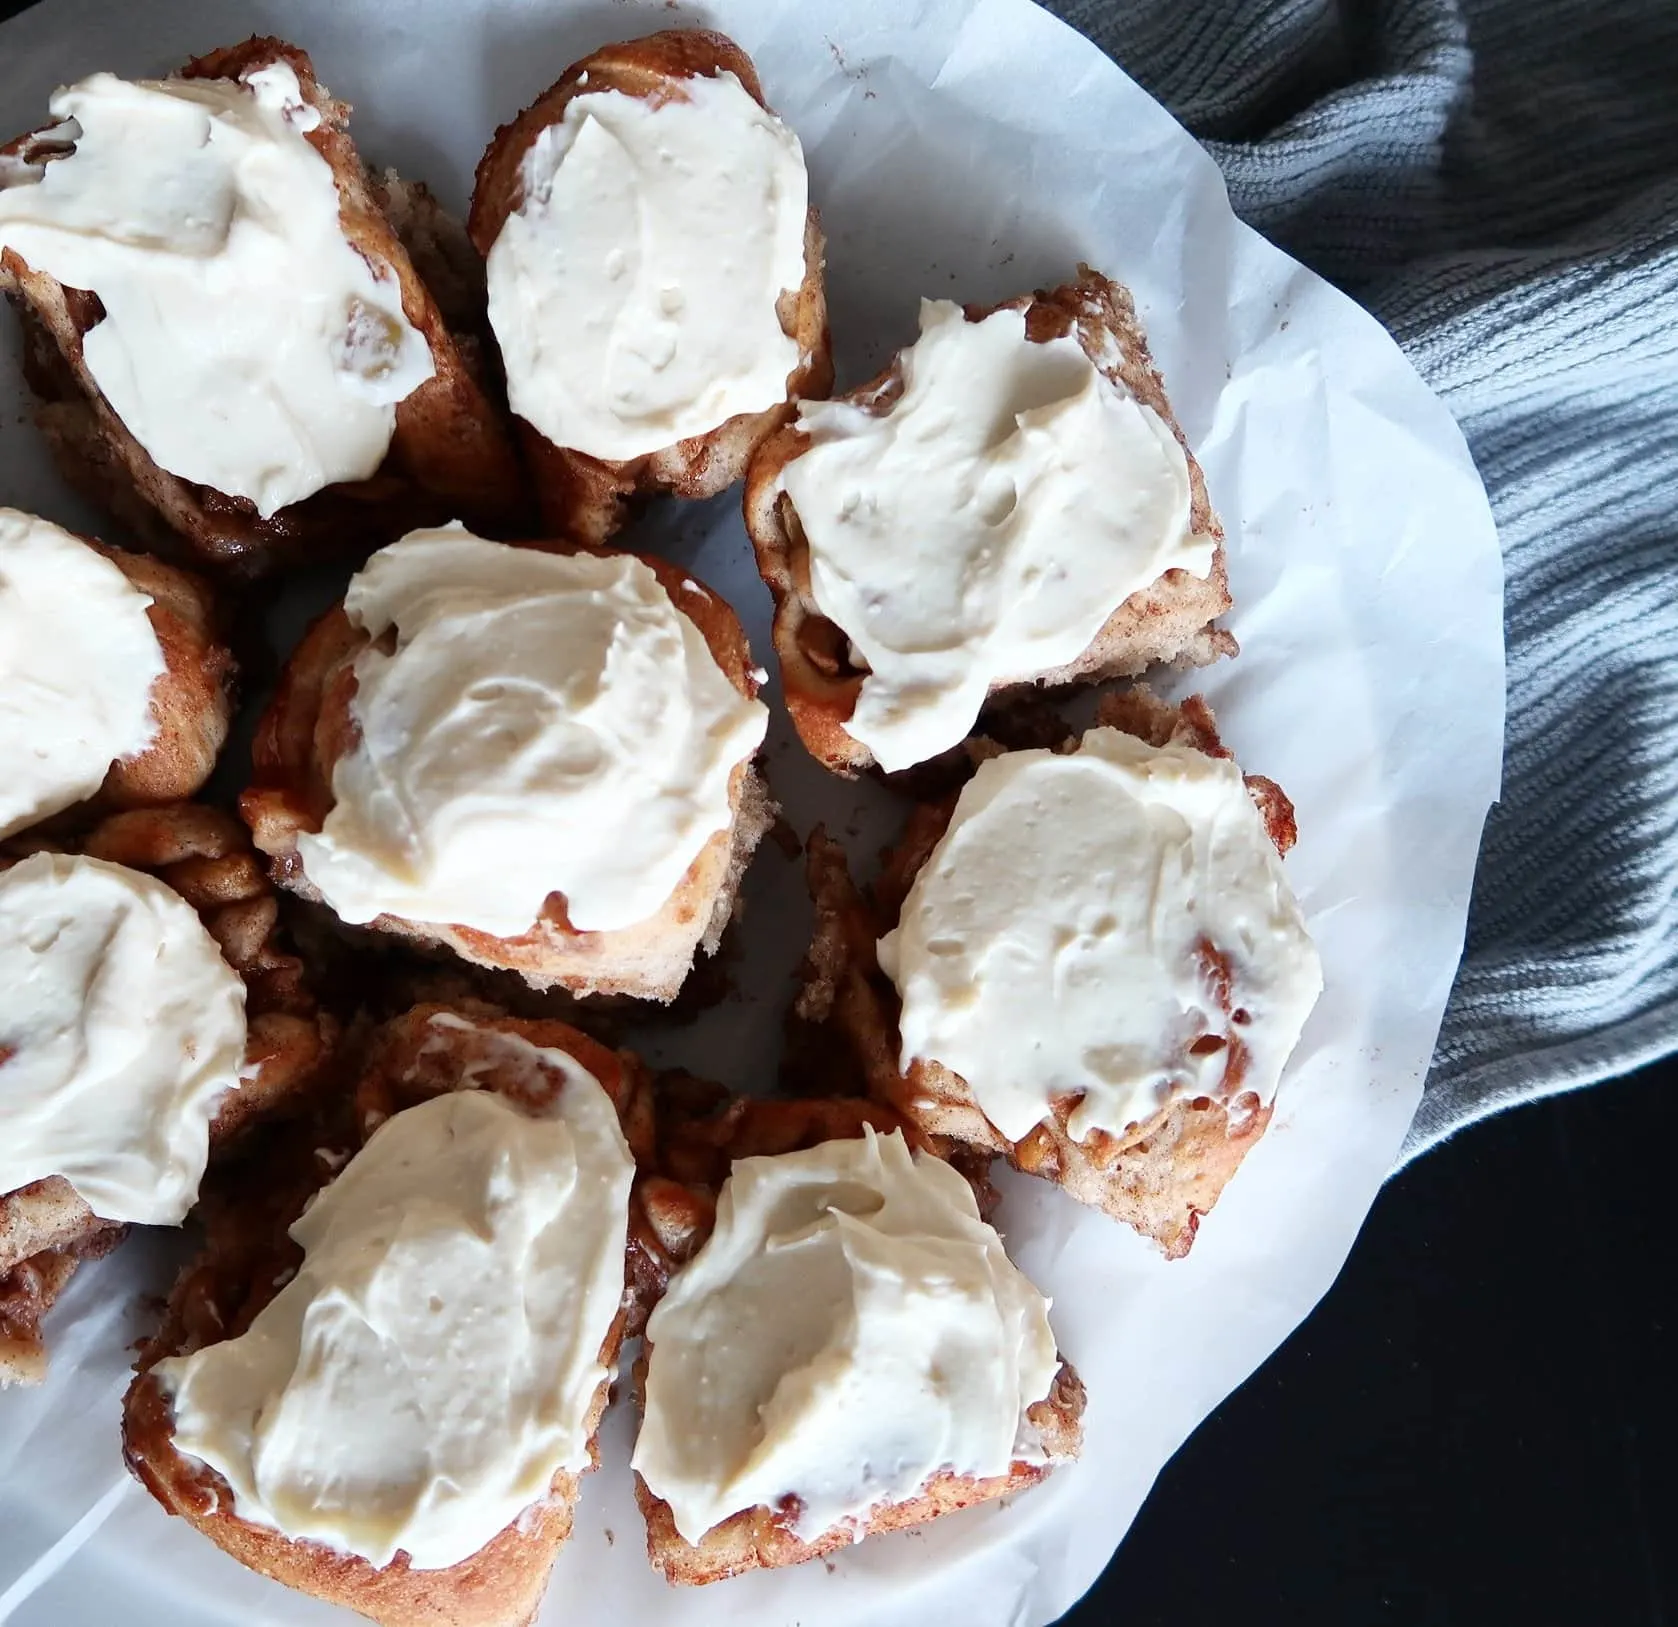 A plate of Apple Cinnamon Rolls with Maple Cream Cheese Frosting.